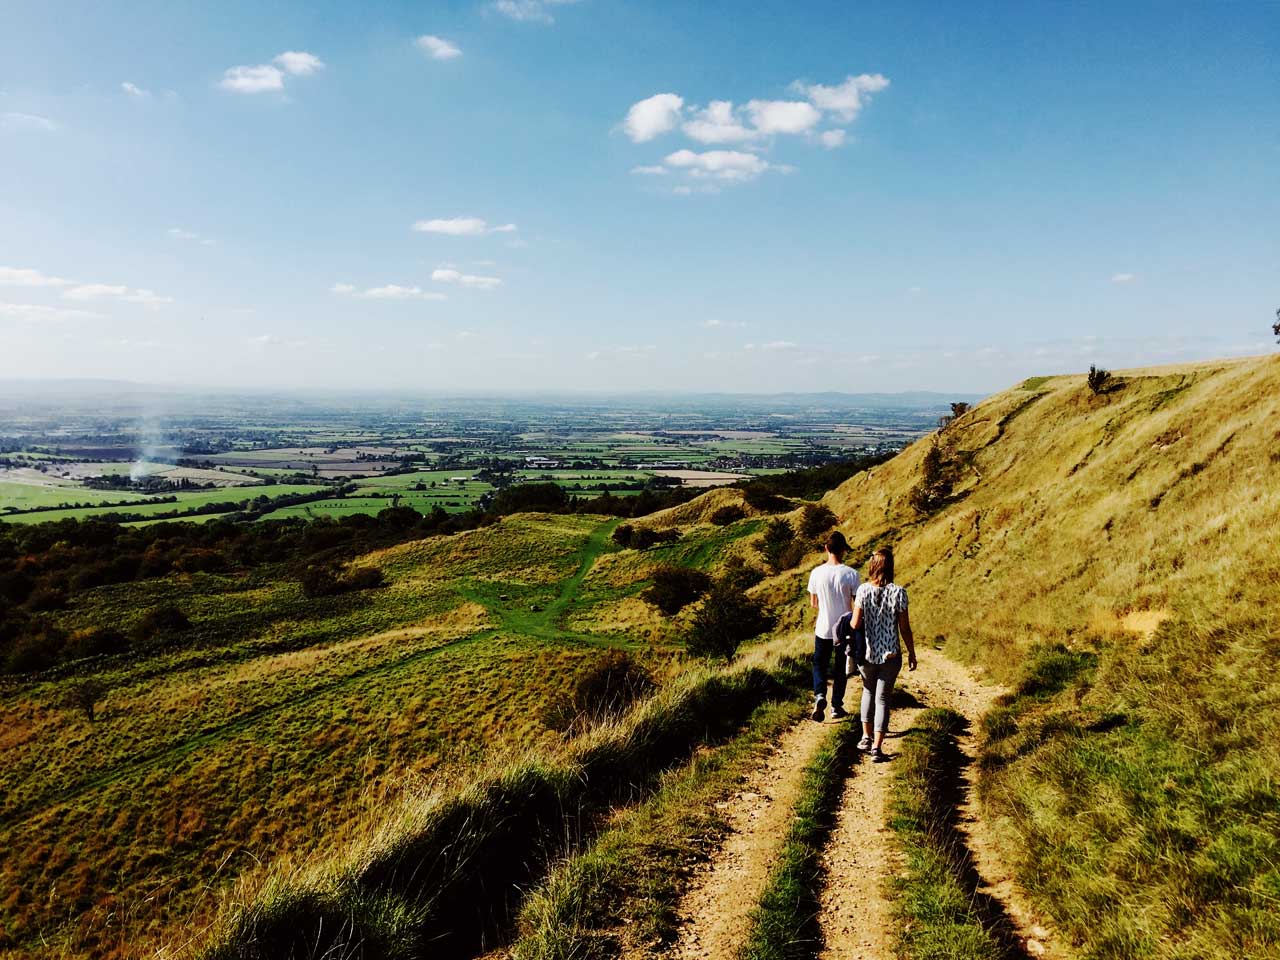 Two people walk along a downhill grassy path with a countryside panorama ahead of them